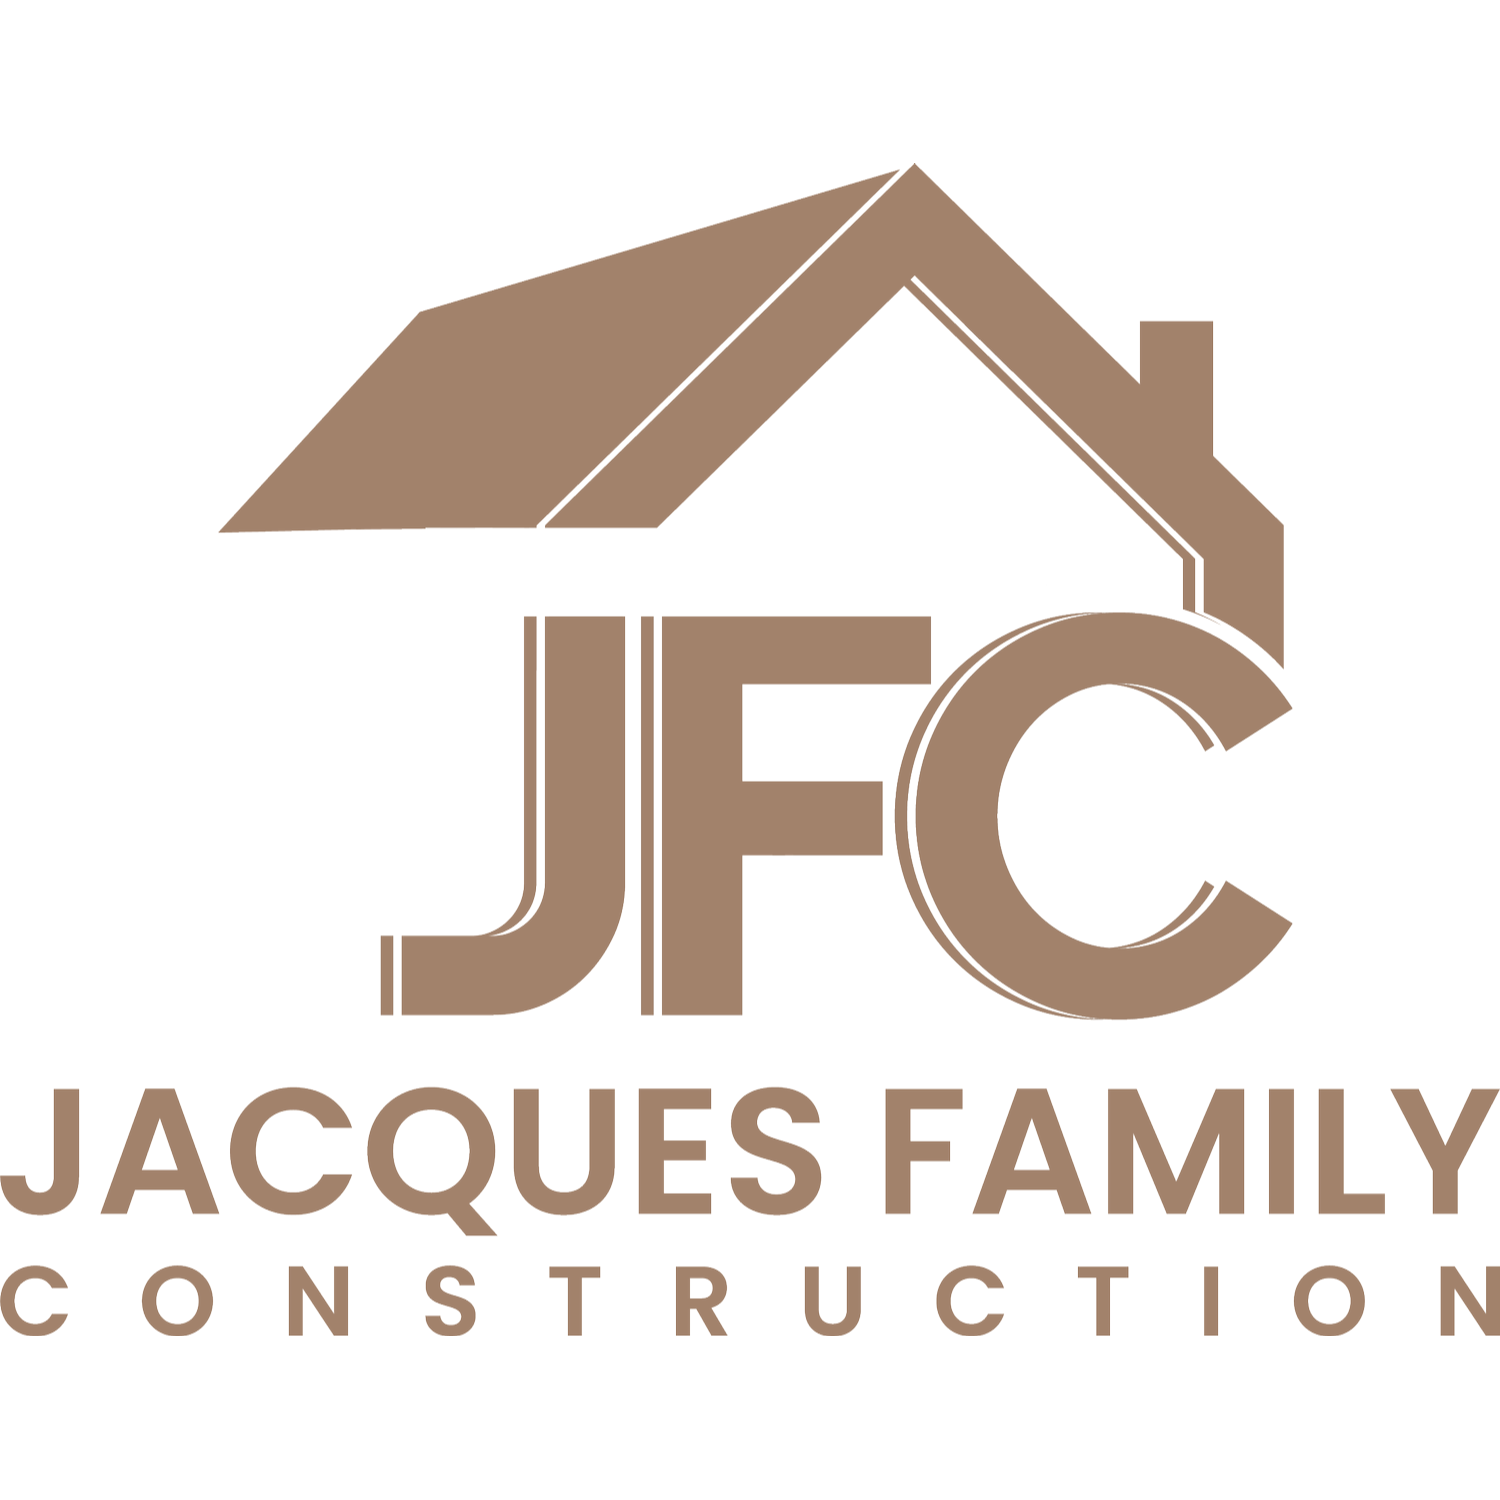 Jacques Family Construction Custom Home Builder and Remodeling Contractor Fort Collins (970)556-5503